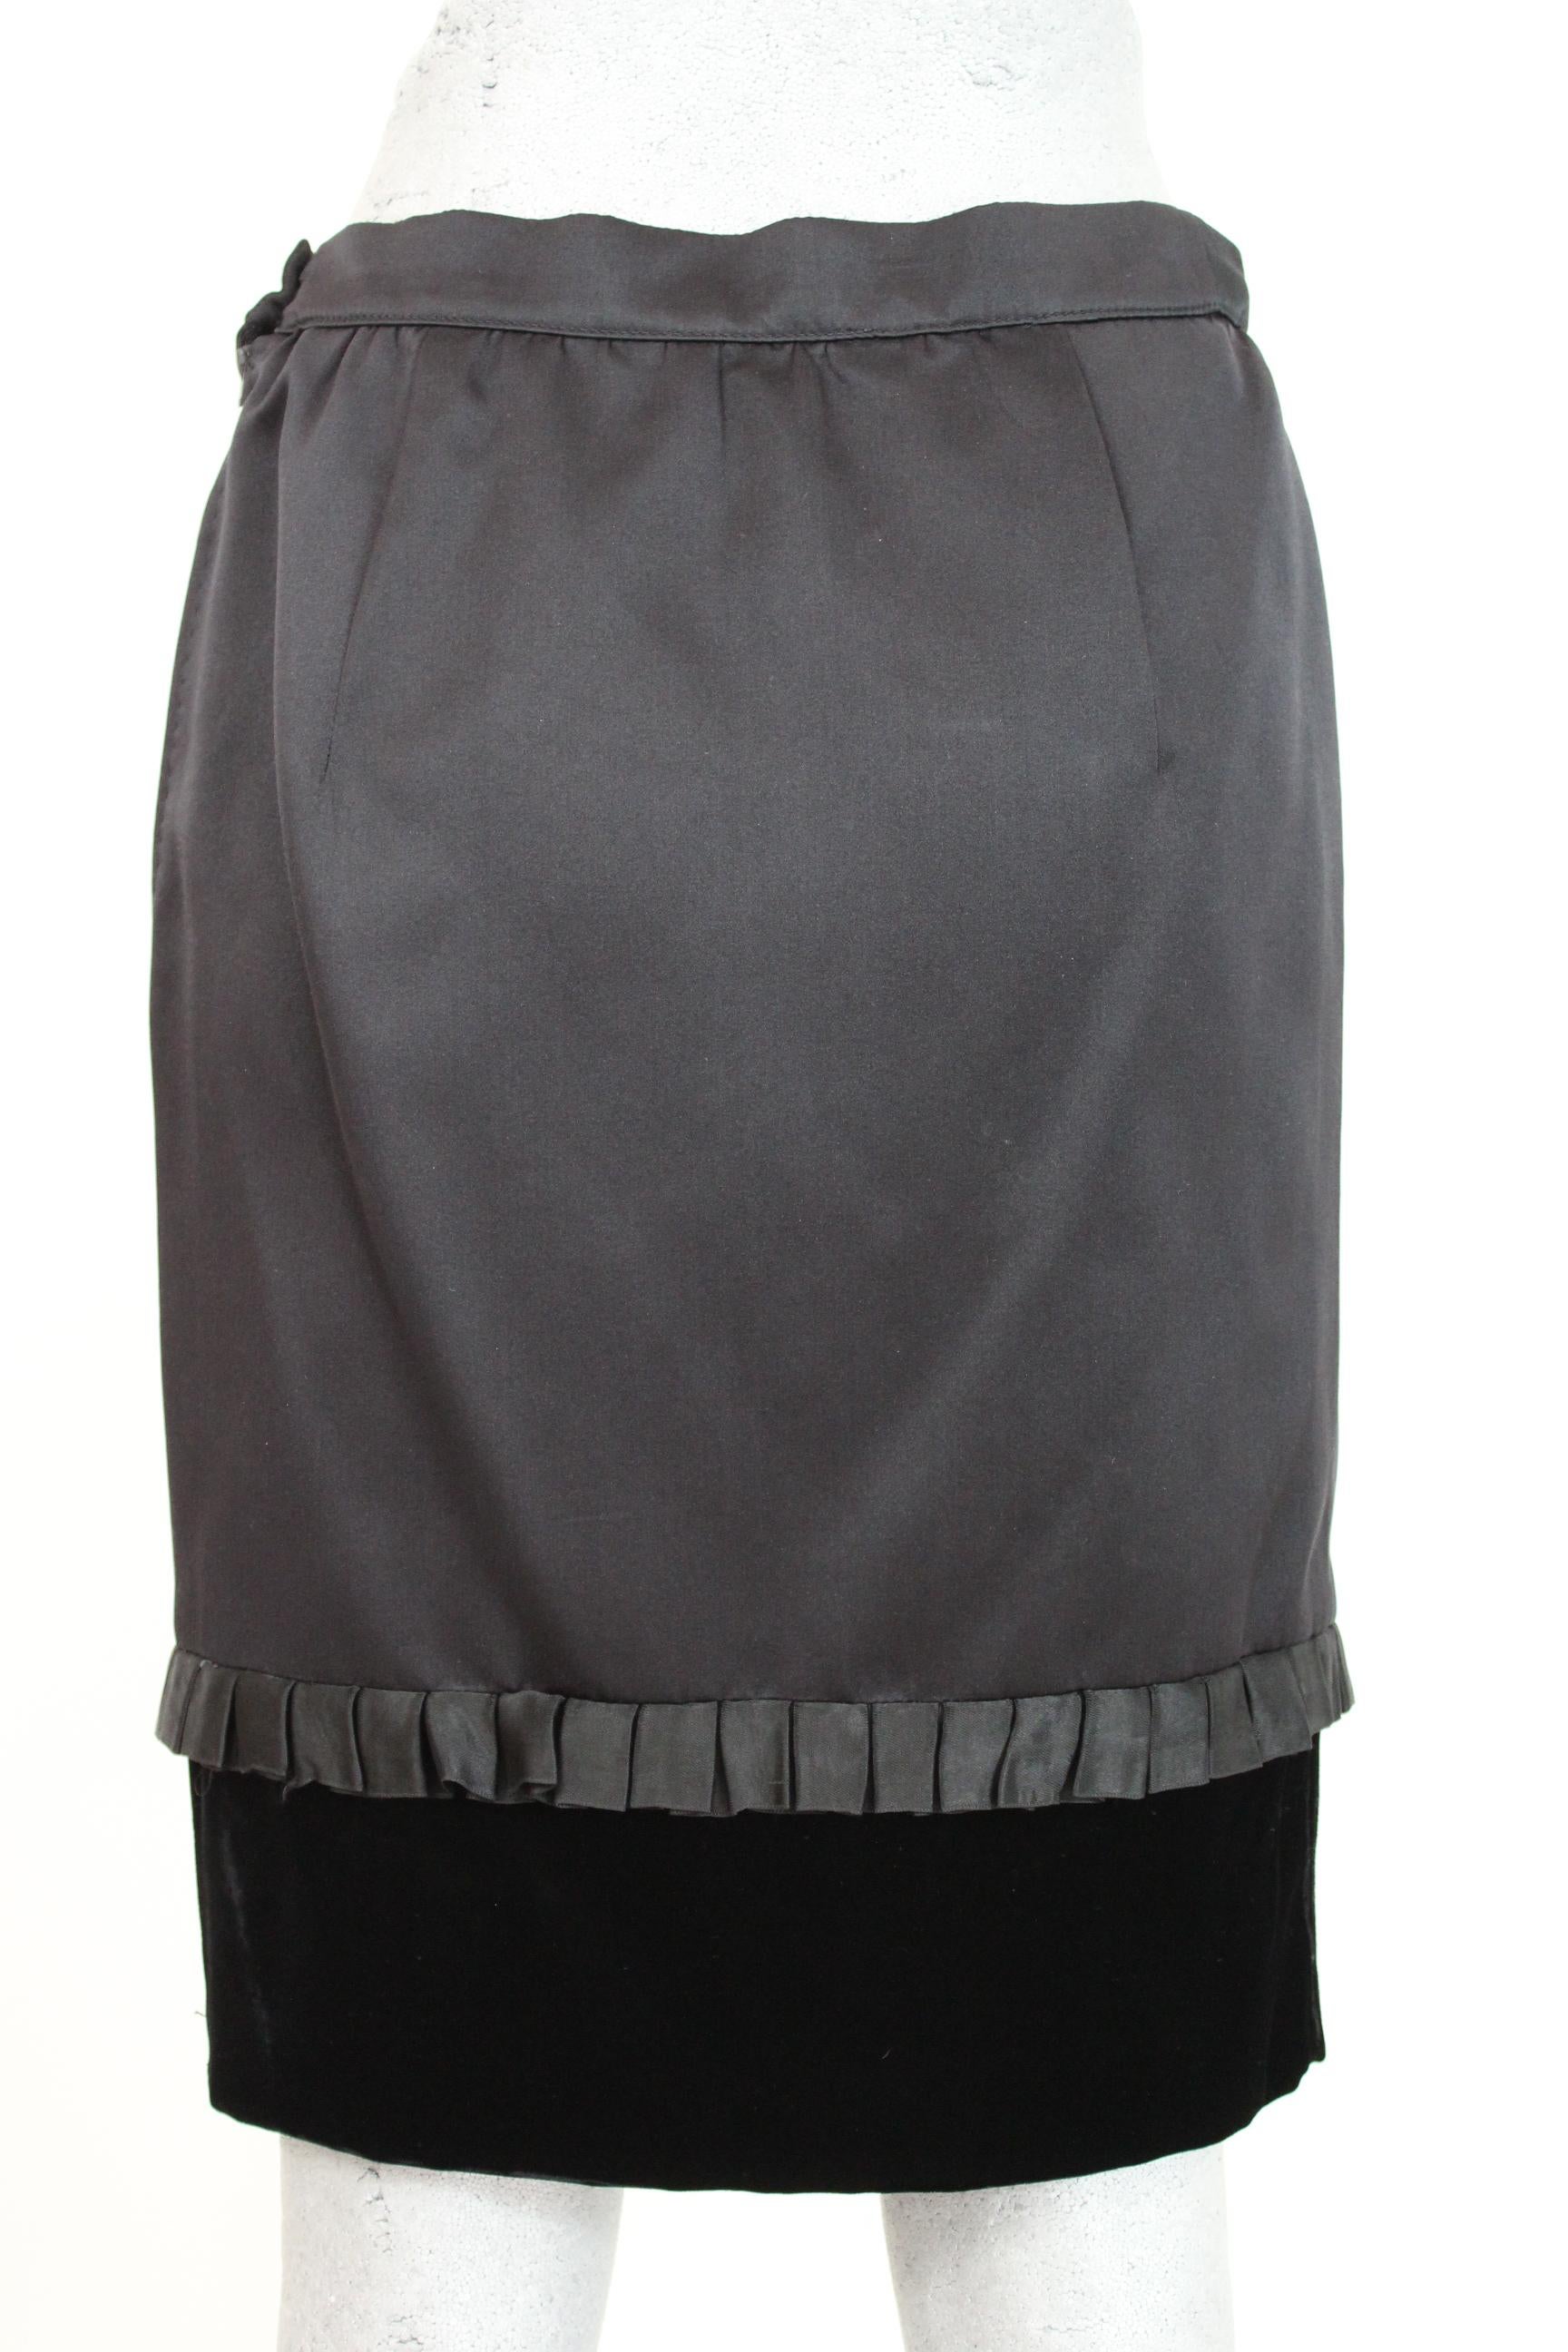 Valentino Boutique elegant vintage 80s skirt. Satin and velvet sheath skirt with knee flounces. Black colour. Zip and button closure. Made in Italy. Excellent vintage conditions.

Size: 42 It 8 Us 10 Uk

Waist: 36 cm

Length: 56 cm

